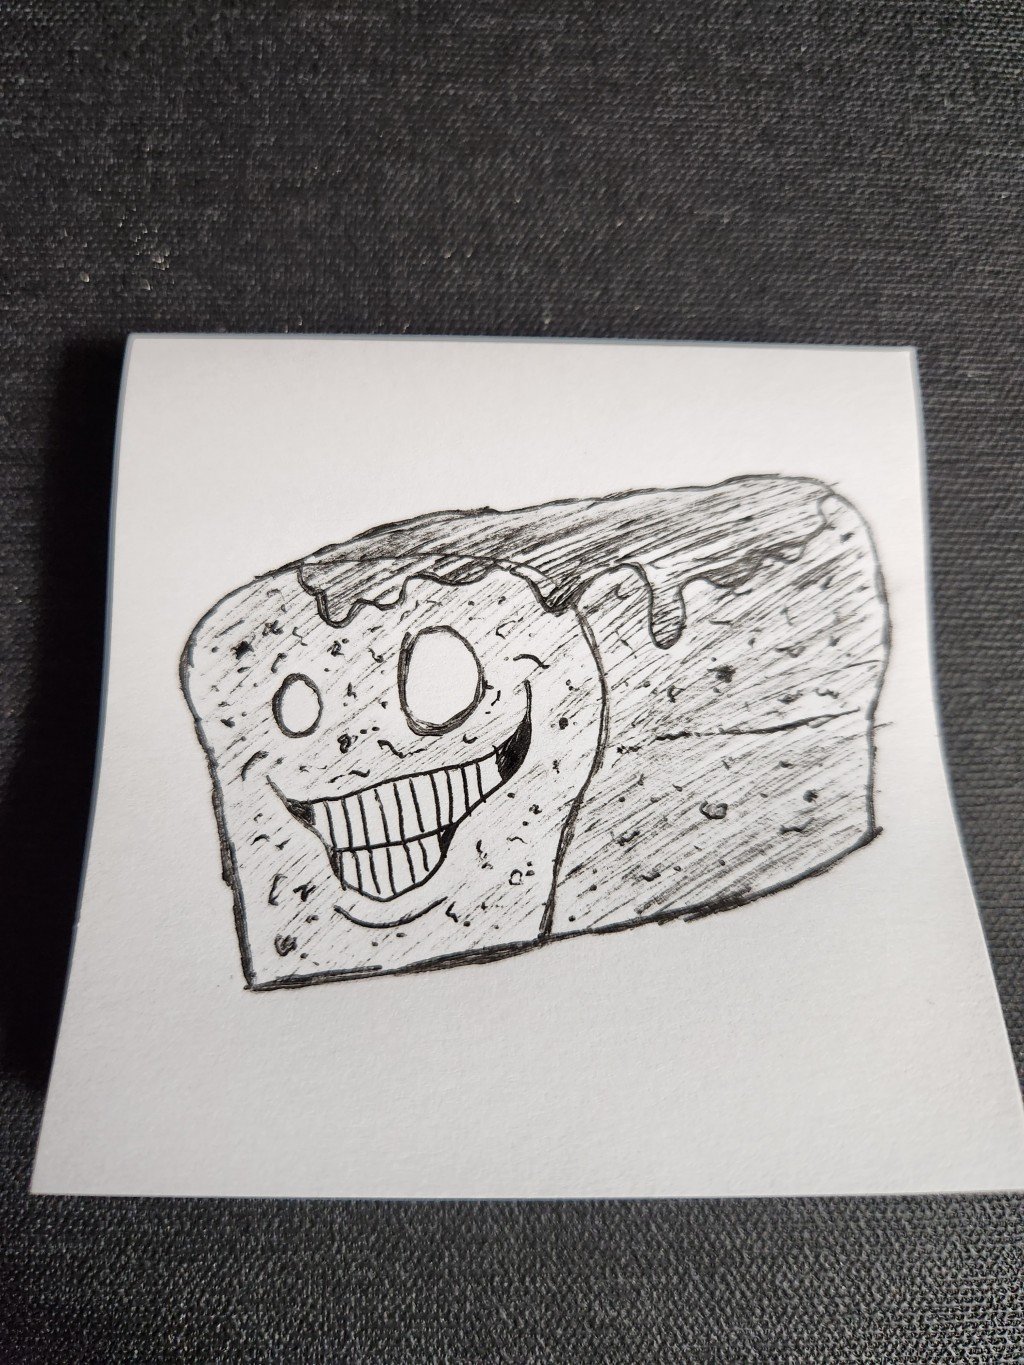 Meatloaf drawing by Dane Mullen Doodle Addicts